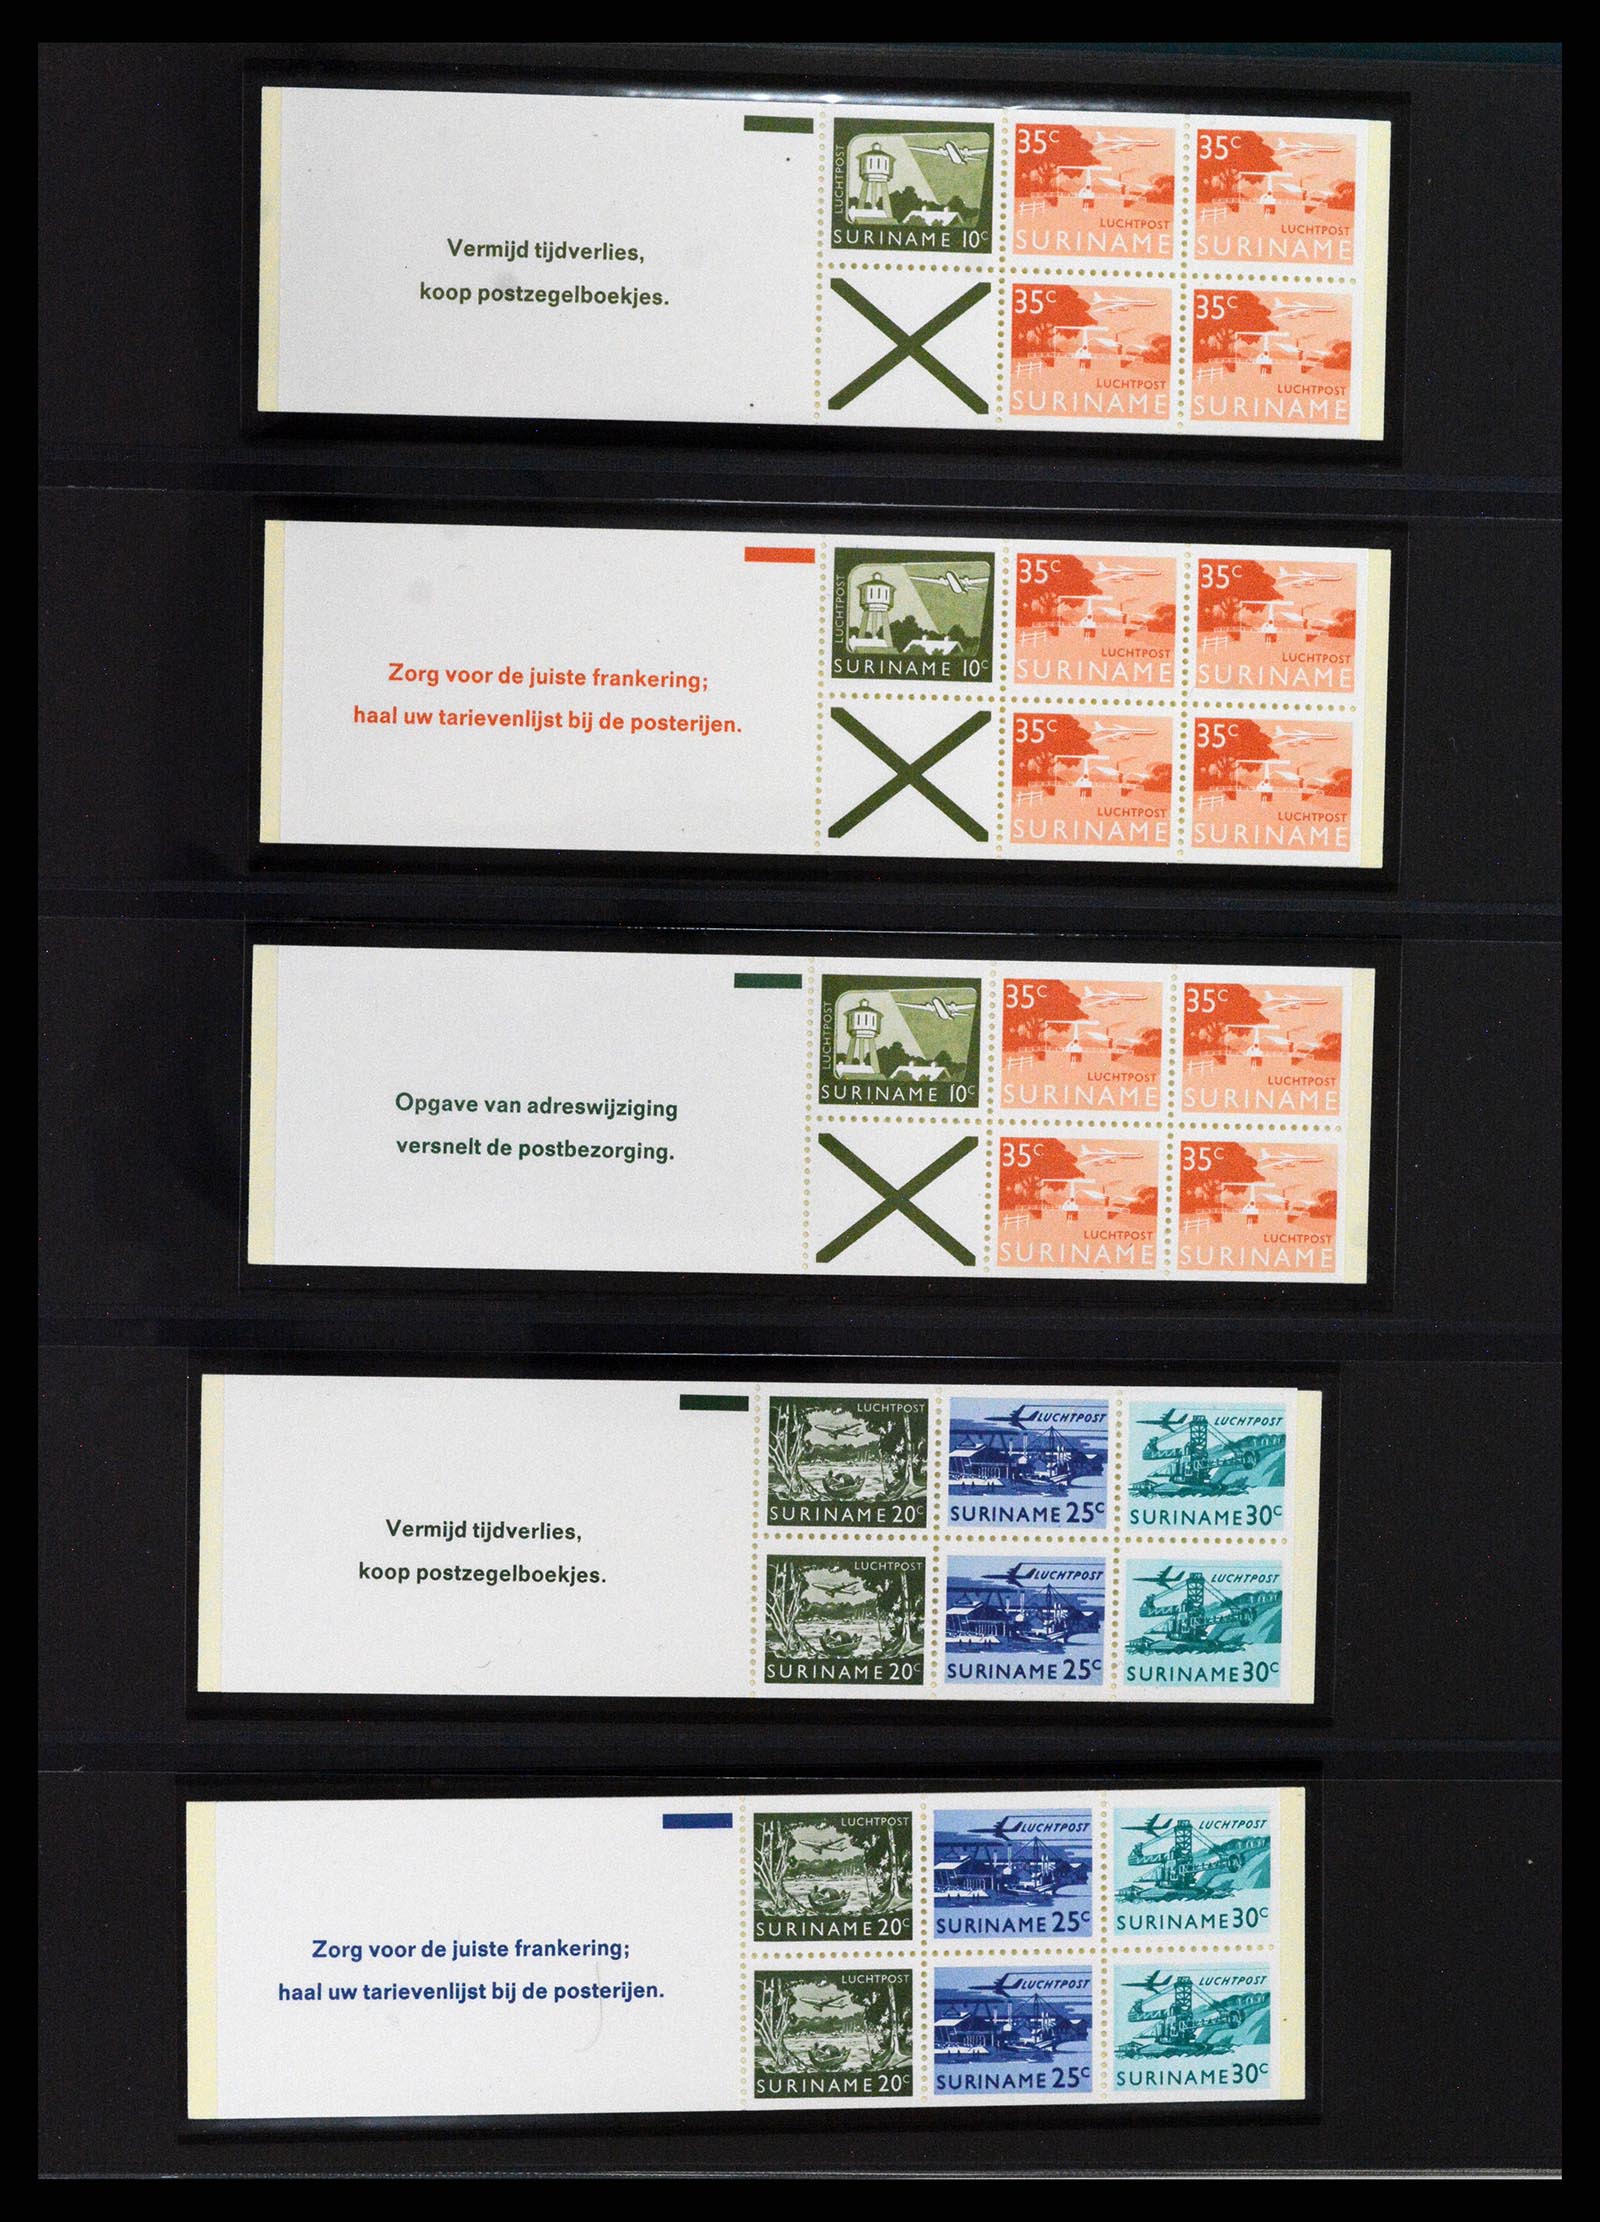 37691 438 - Stamp collection 37691 Suriname 1975-2012.